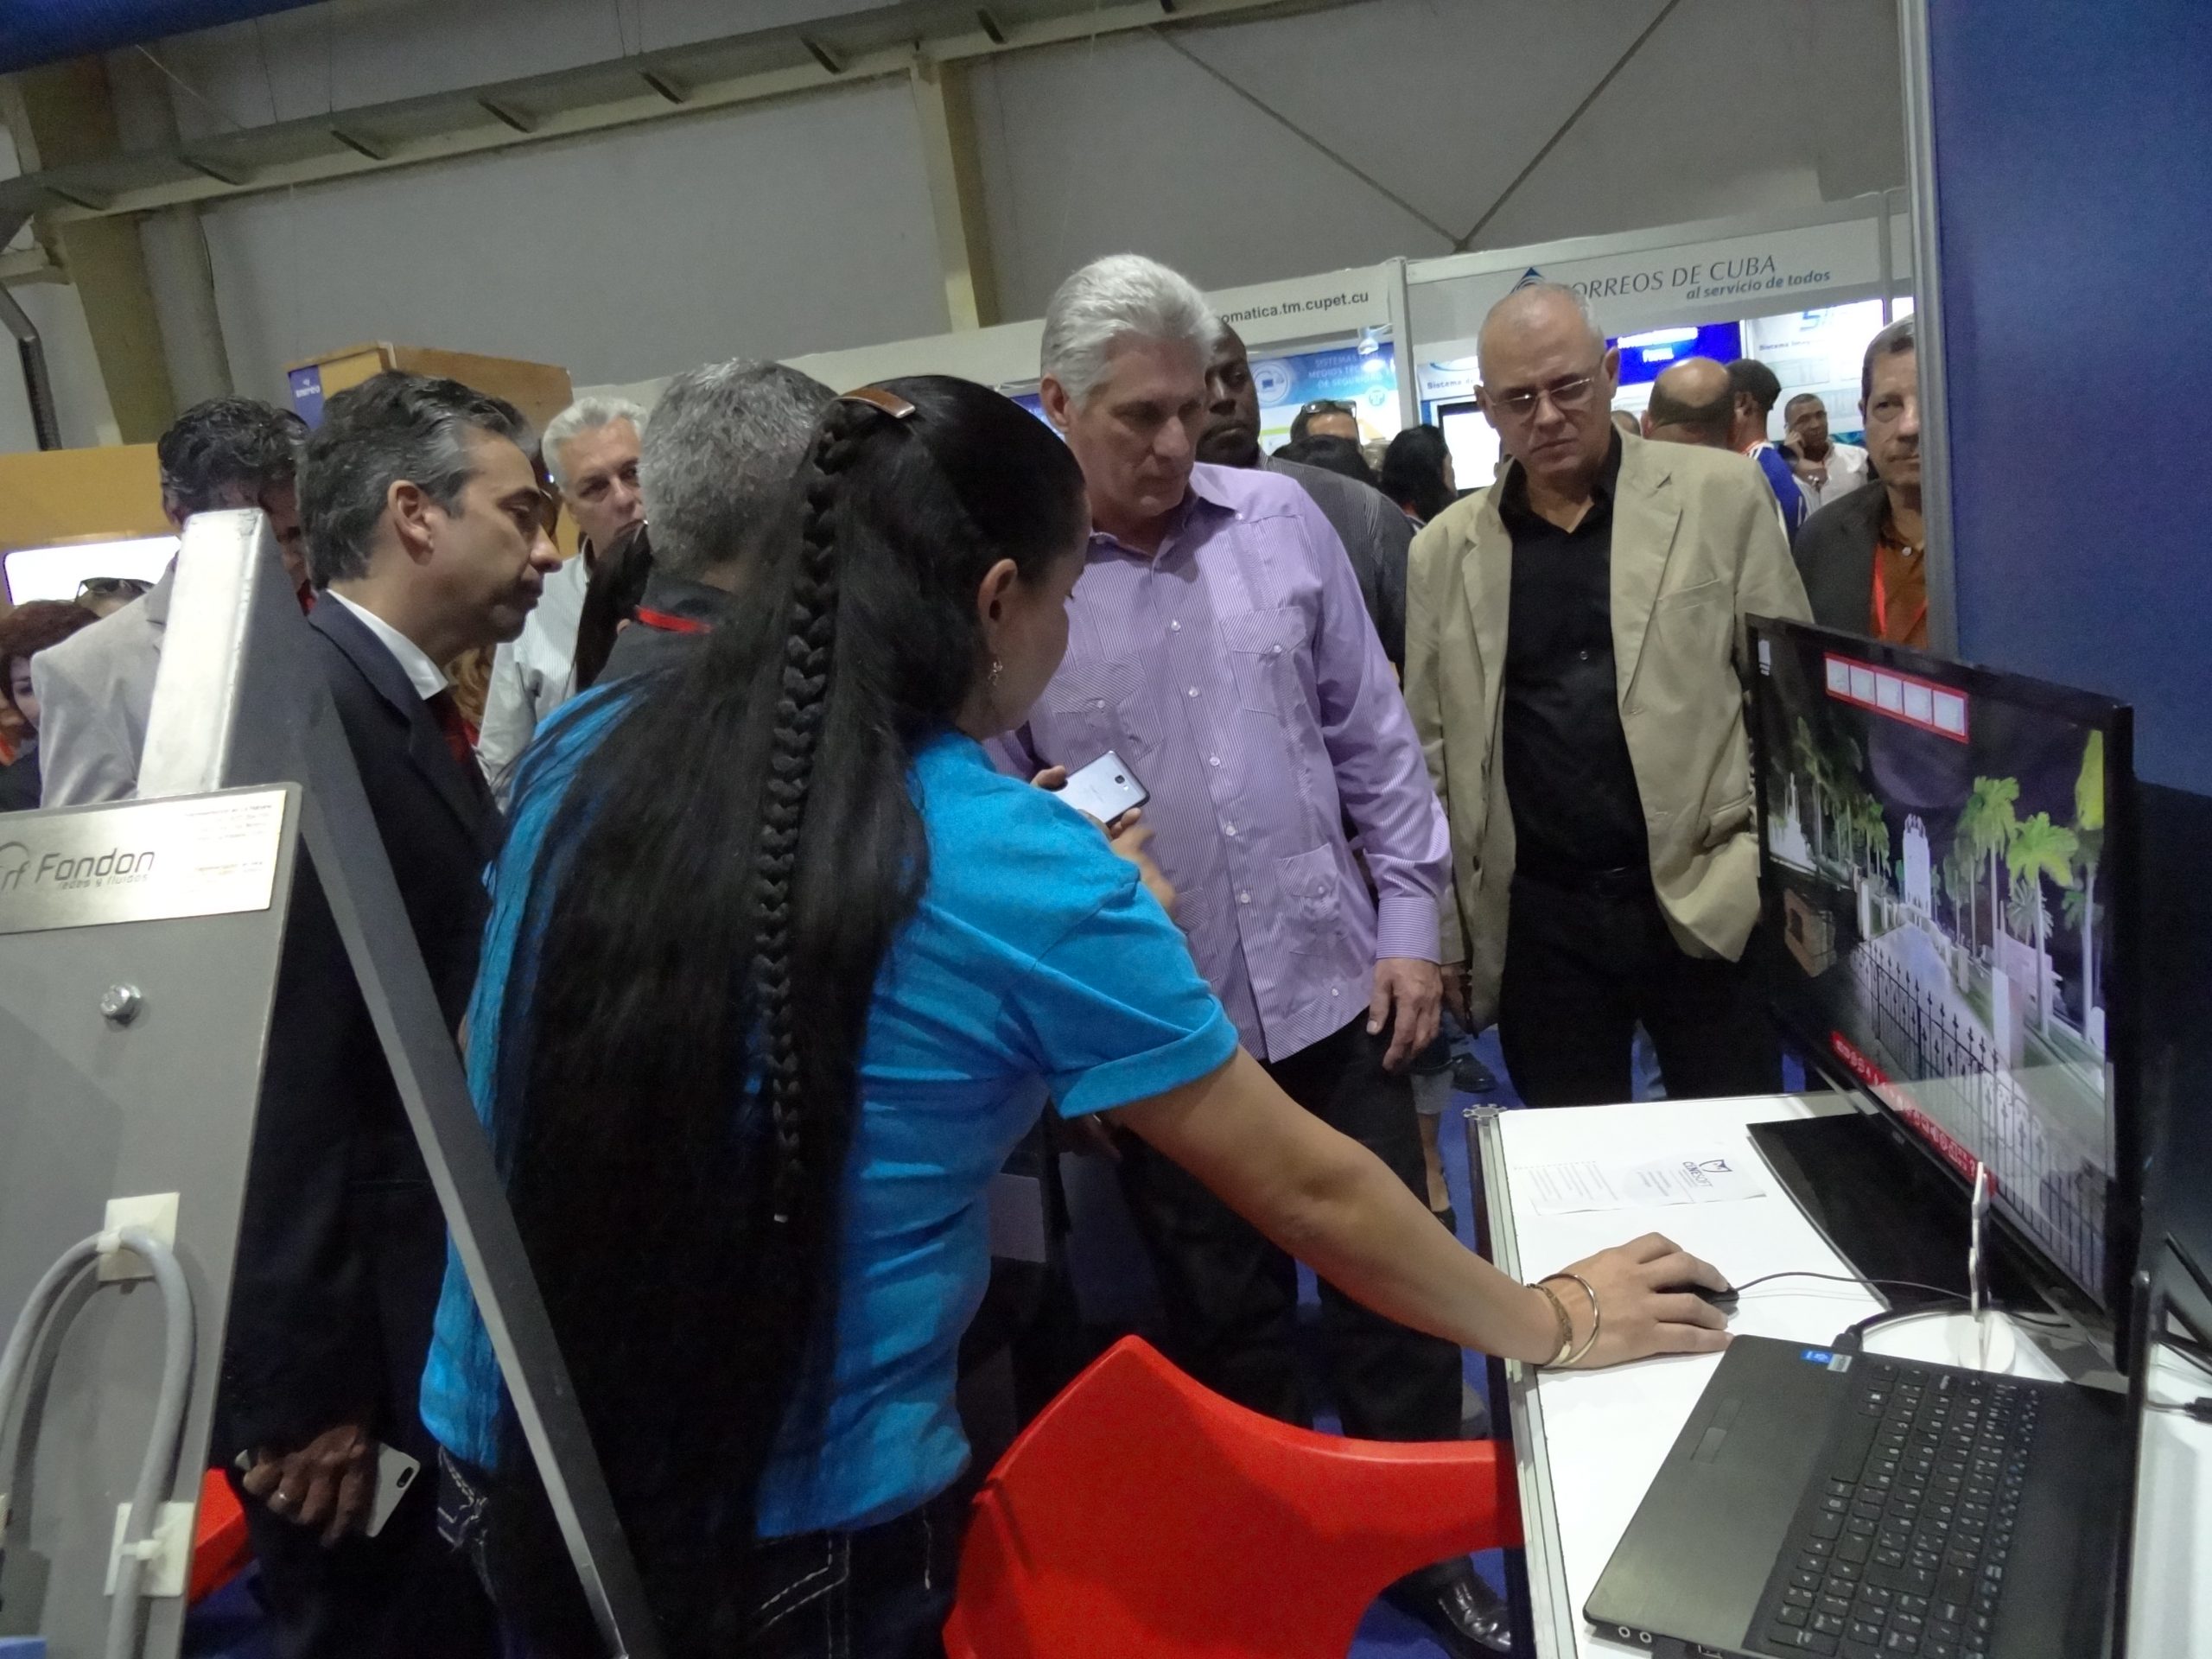 2018 Miguel Diaz-Canel, President of the Republic of Cuba, visits the Fair